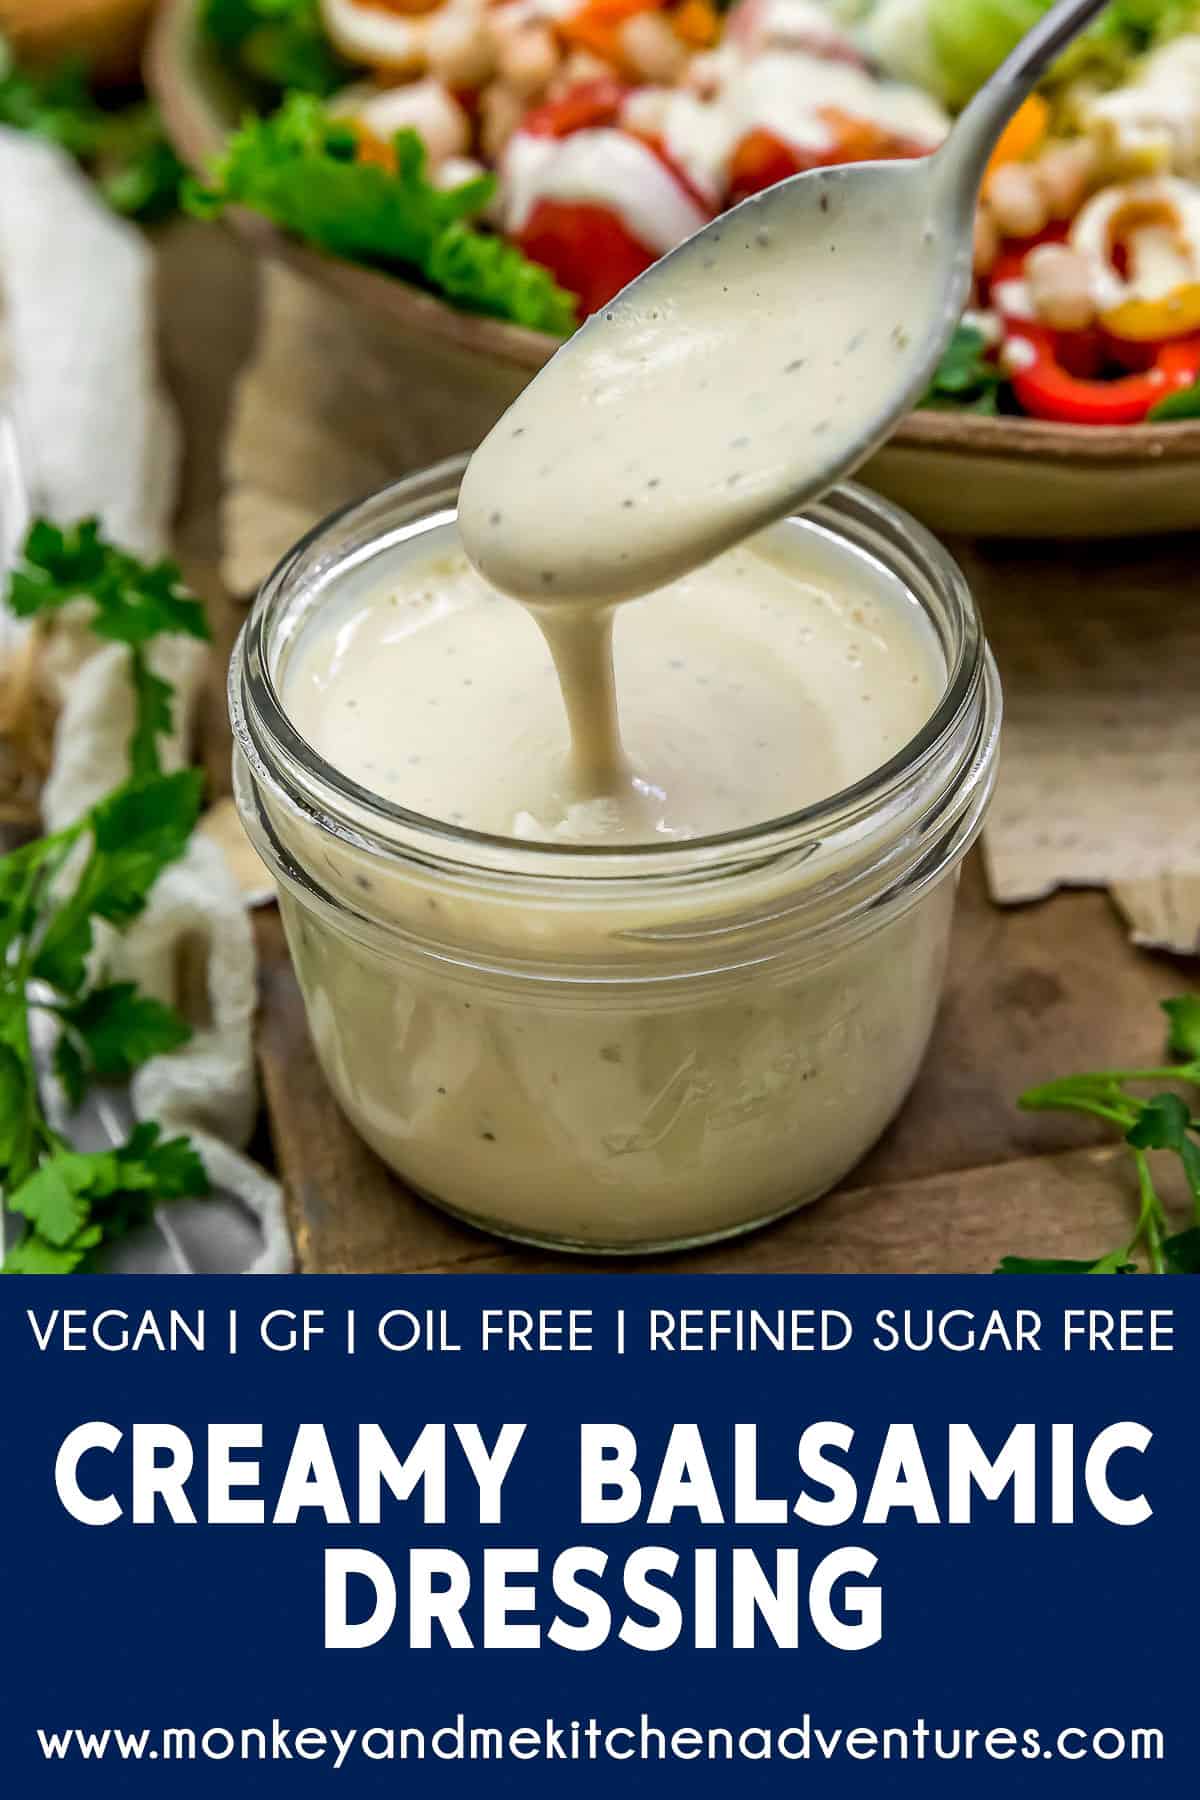 Creamy Balsamic Dressing with text description